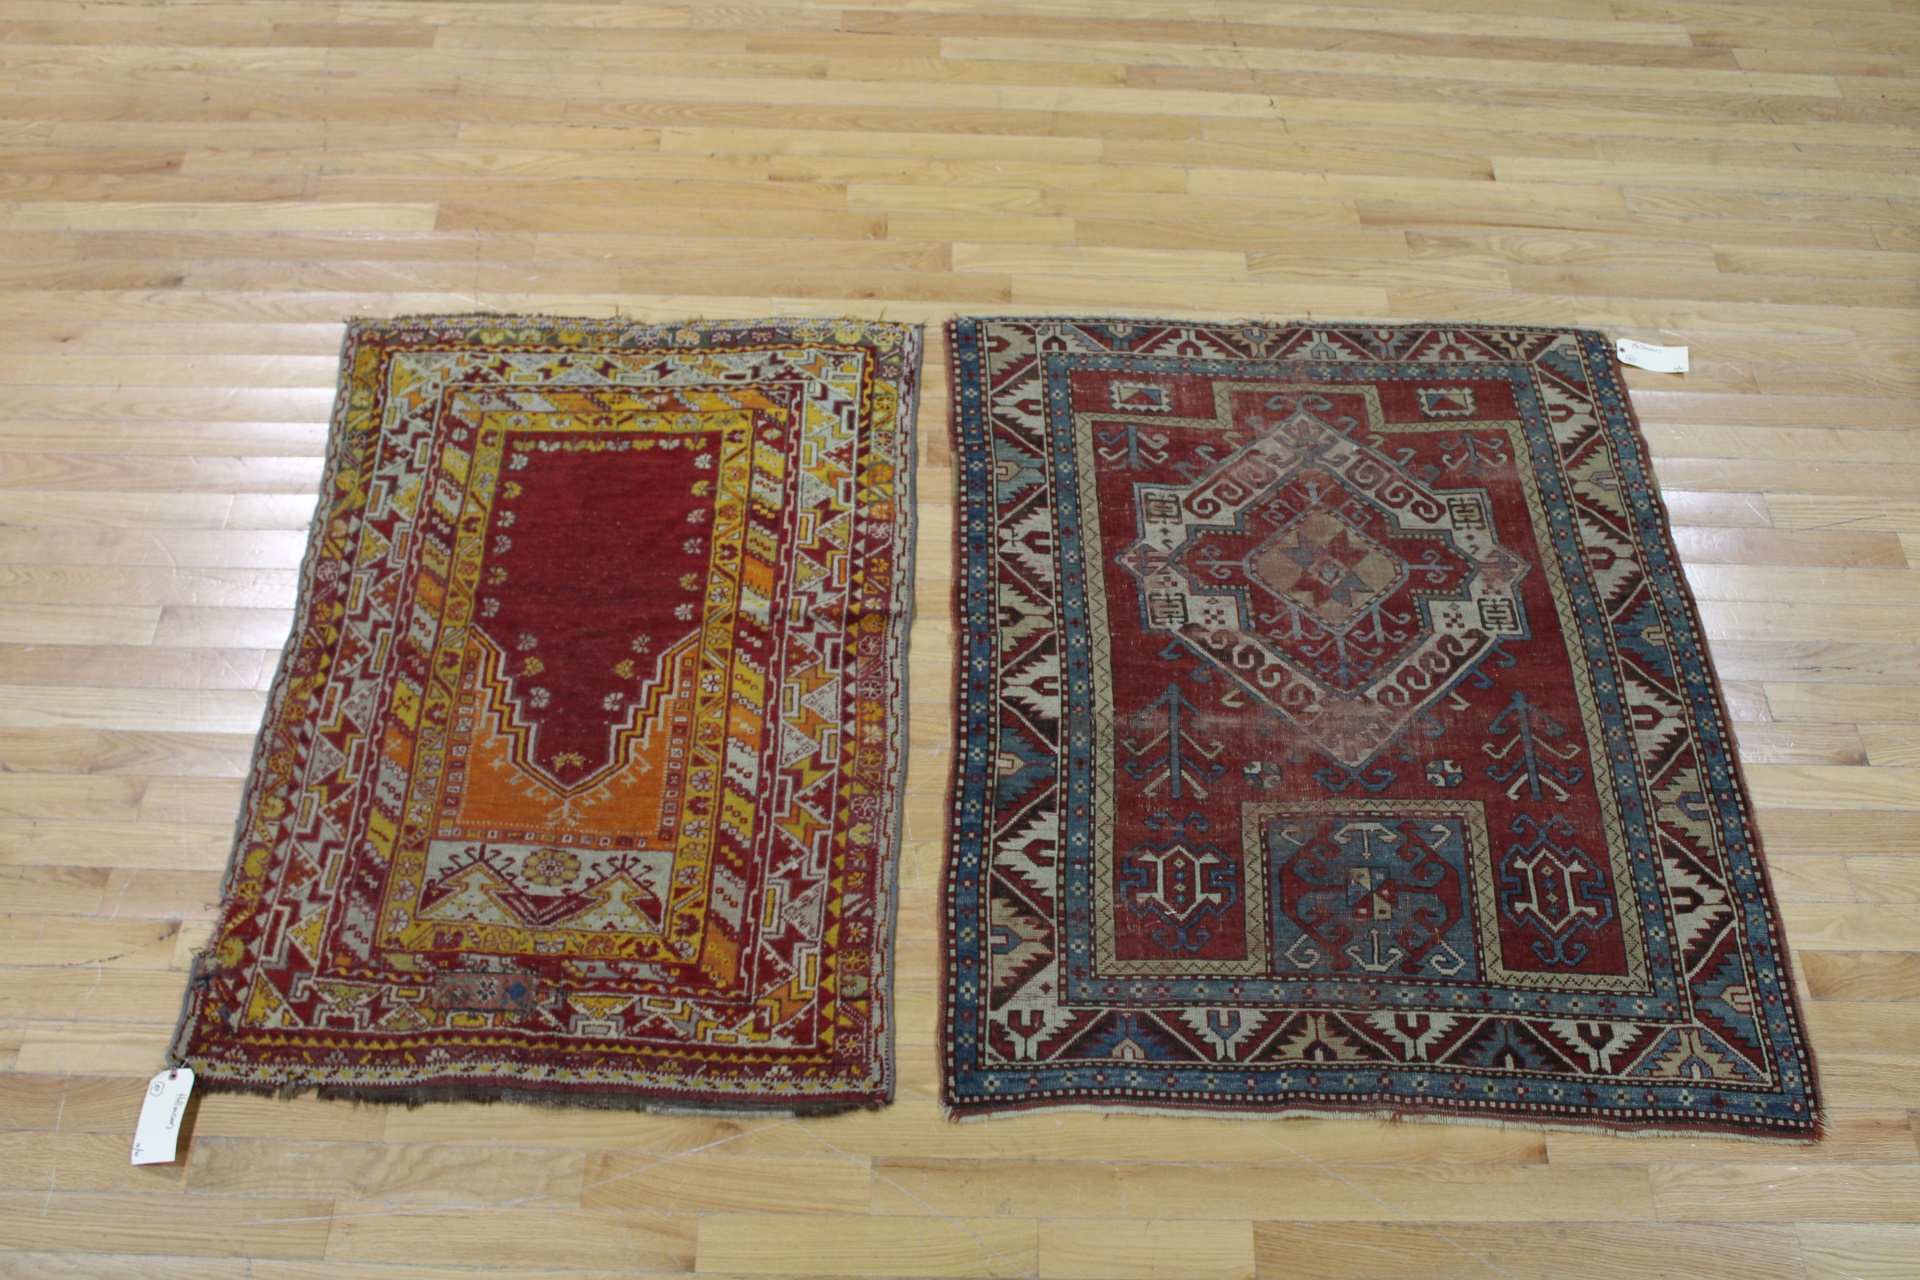 2 ANTIQUE AND FINELY HAND WOVEN 3b9098